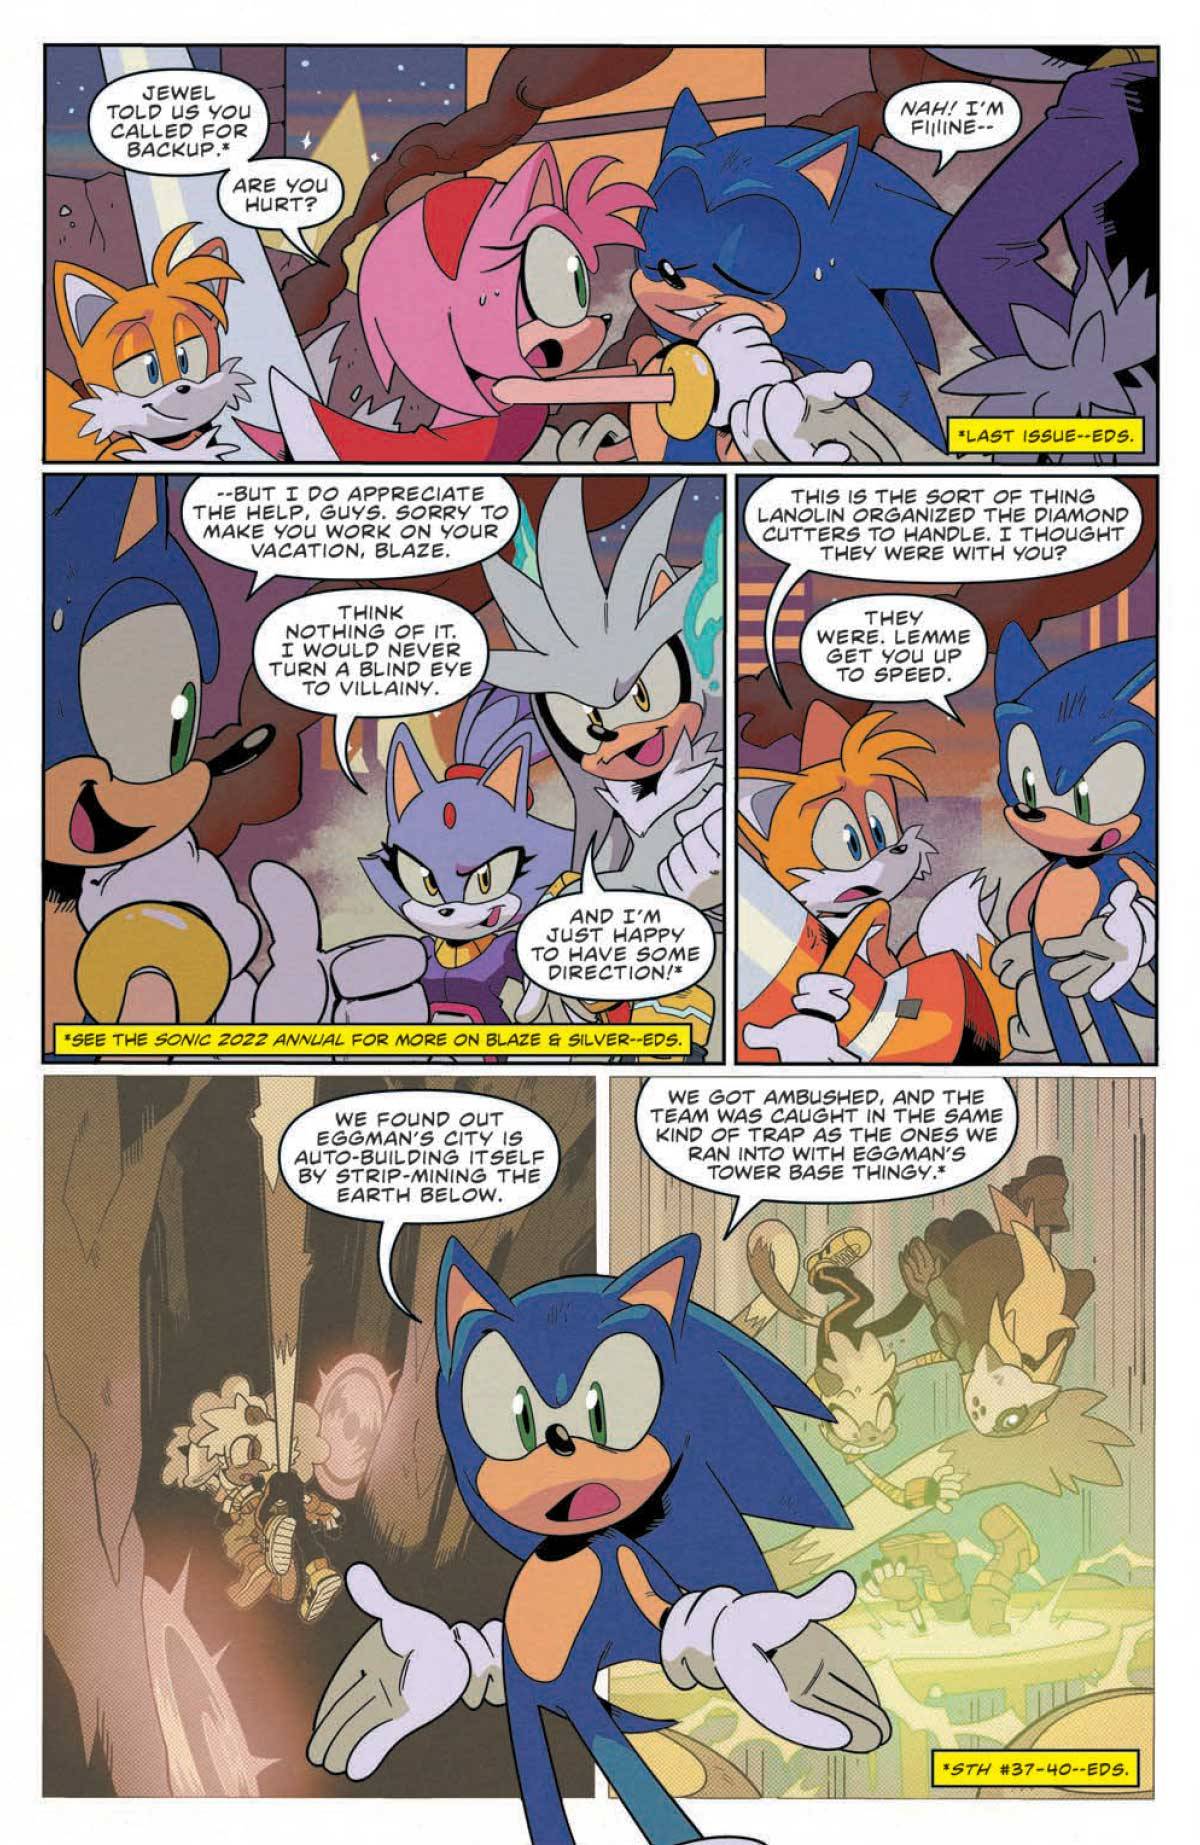 Sonic the Hedgehog #68 Preview